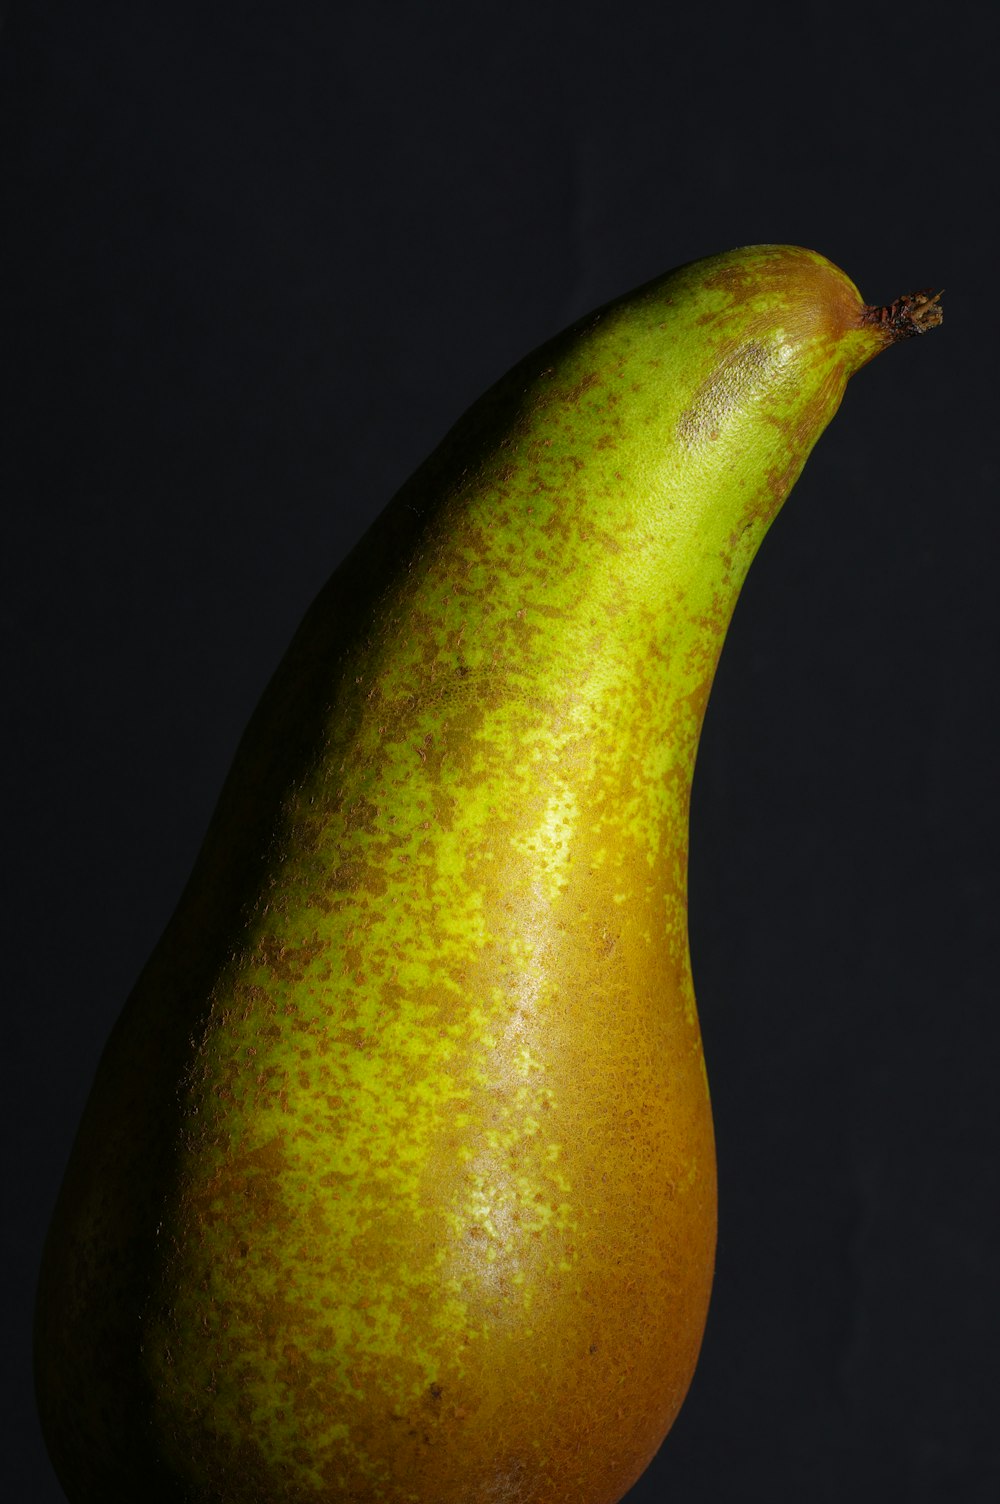 a close up of a pear on a black background